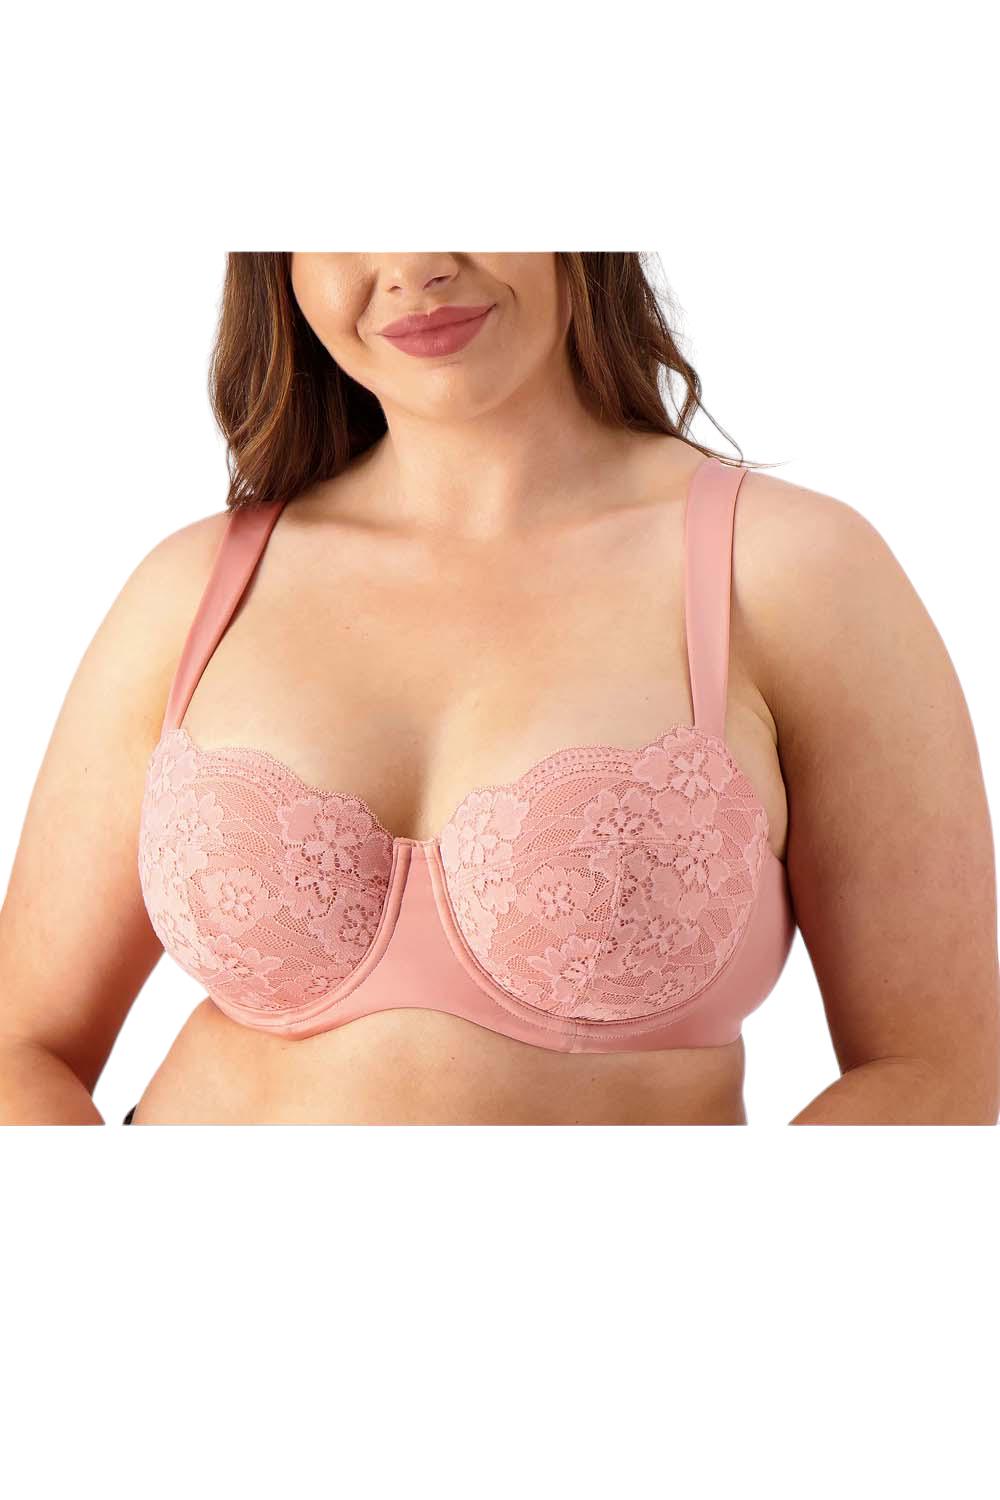 Rhonda Shear Molded Cup Bra with Back Closure Gray/Dusty Pink